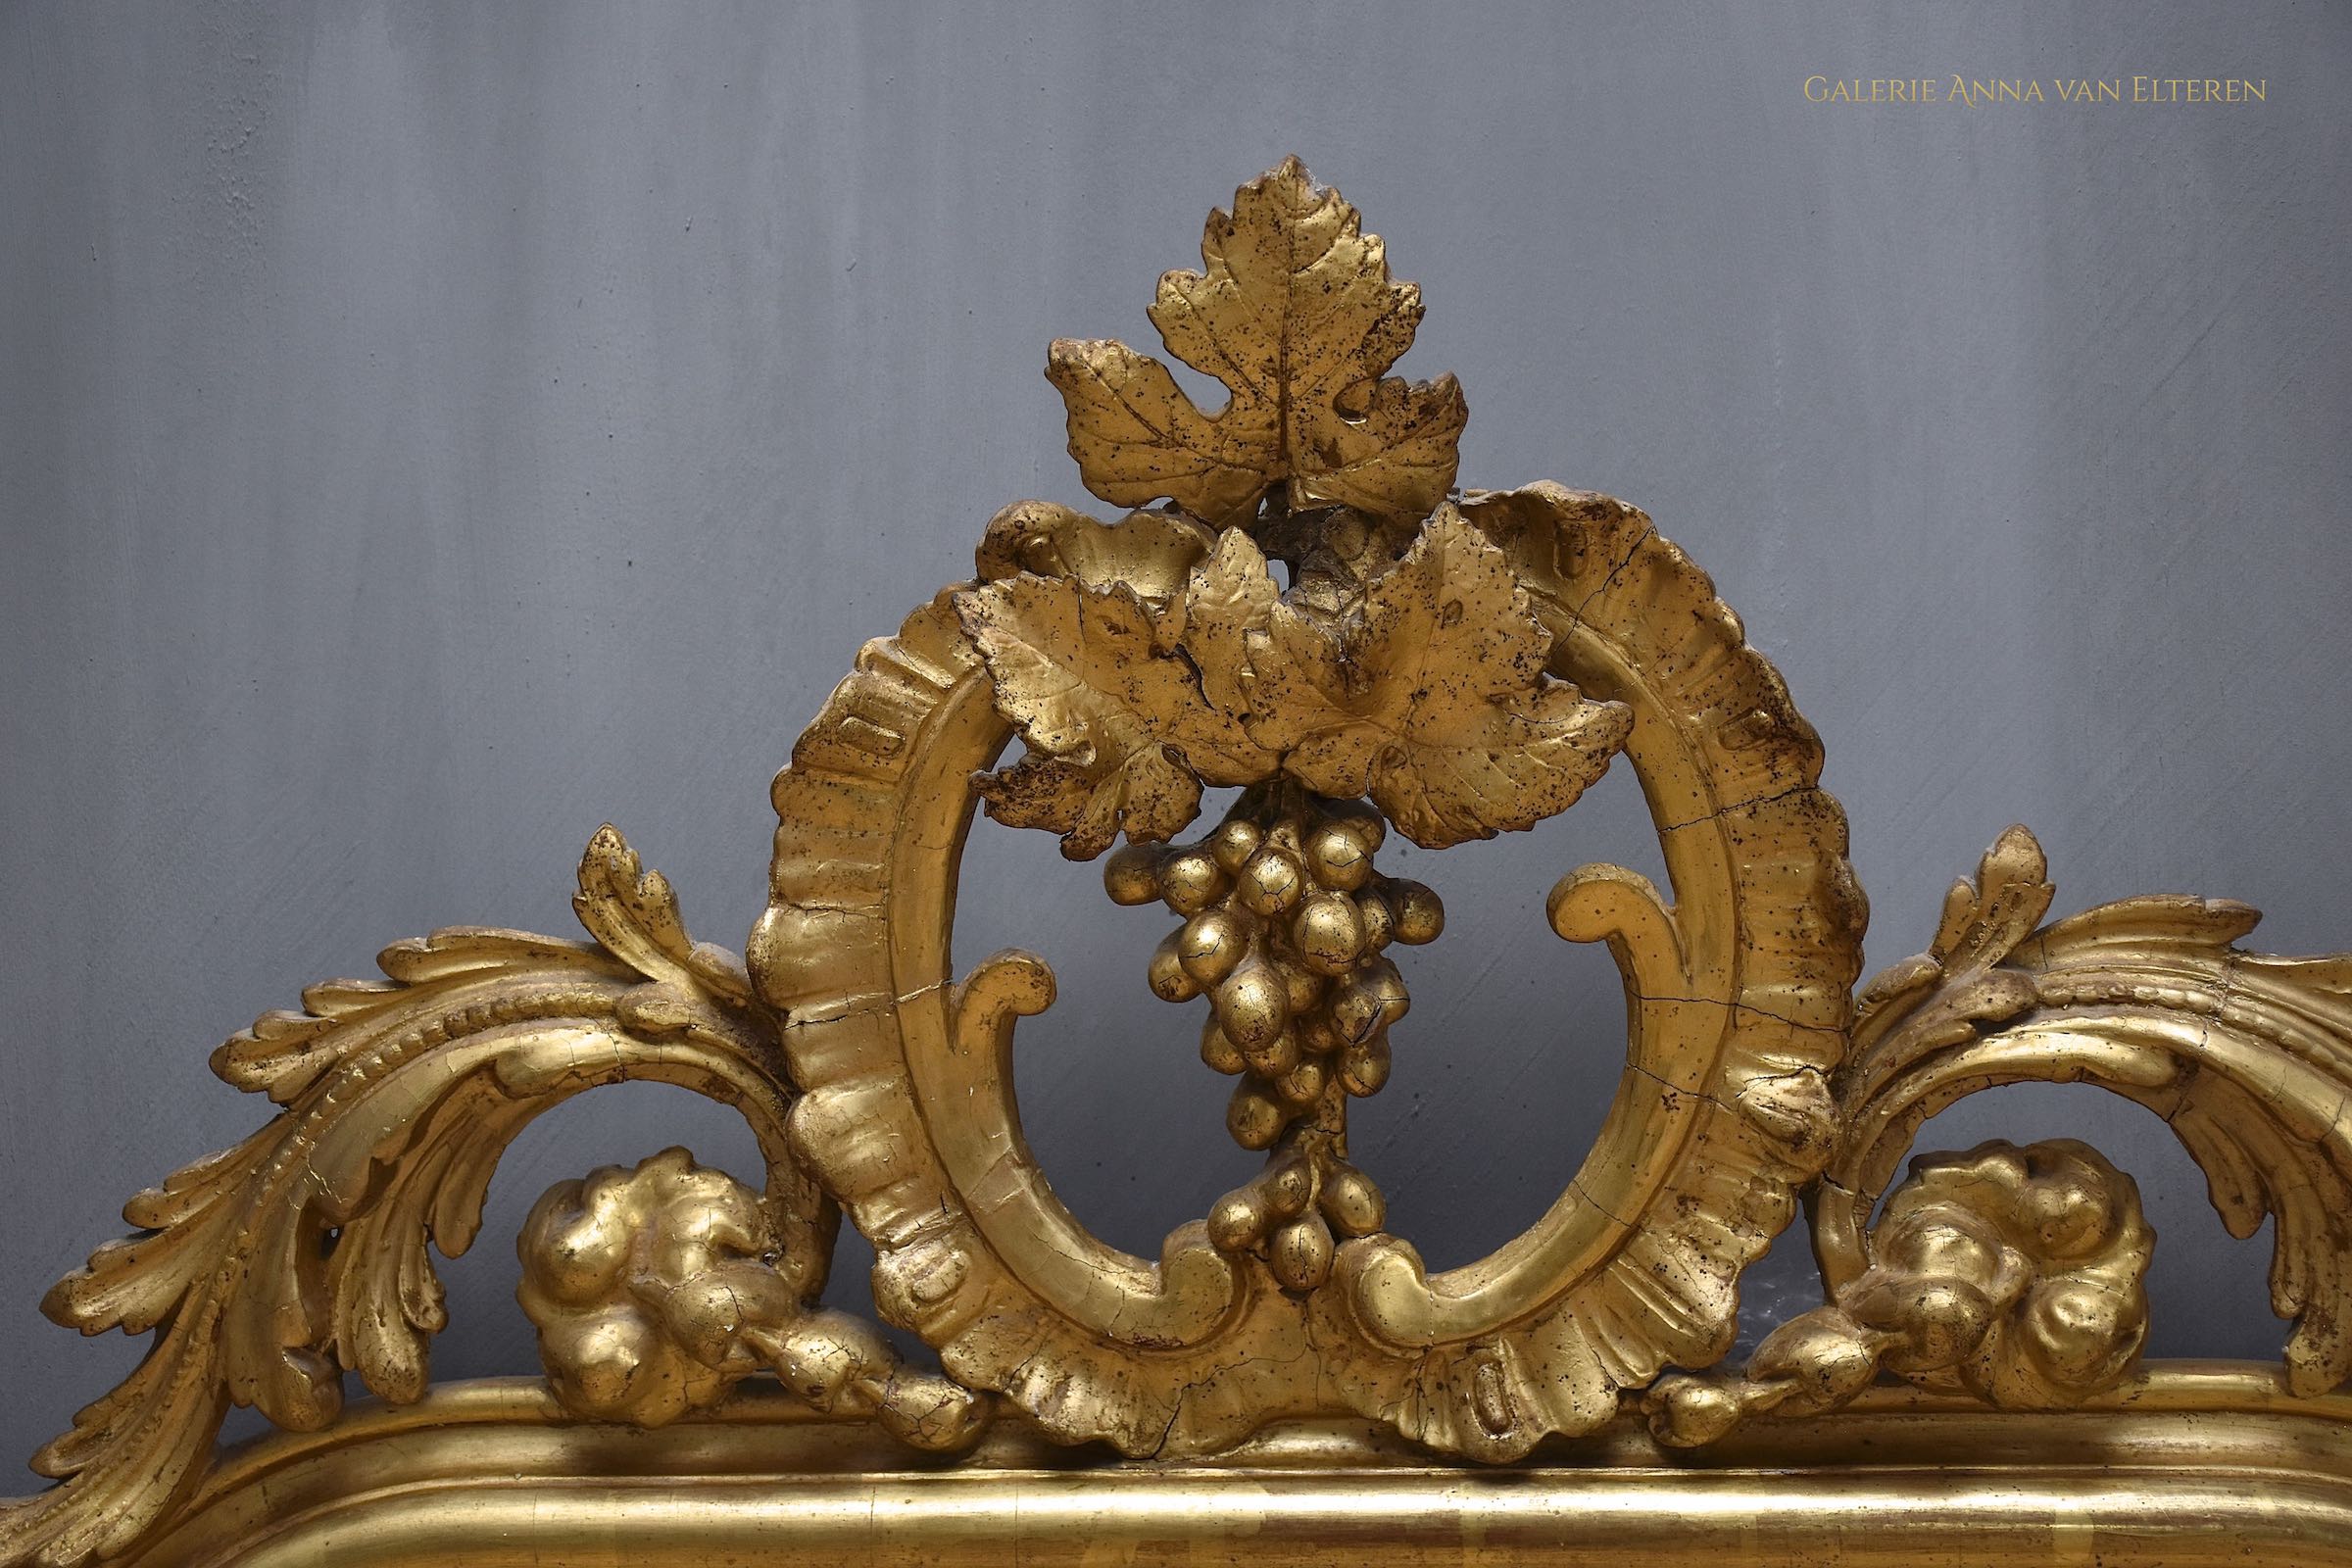 19th c. gilded and carved French mirror with a crown